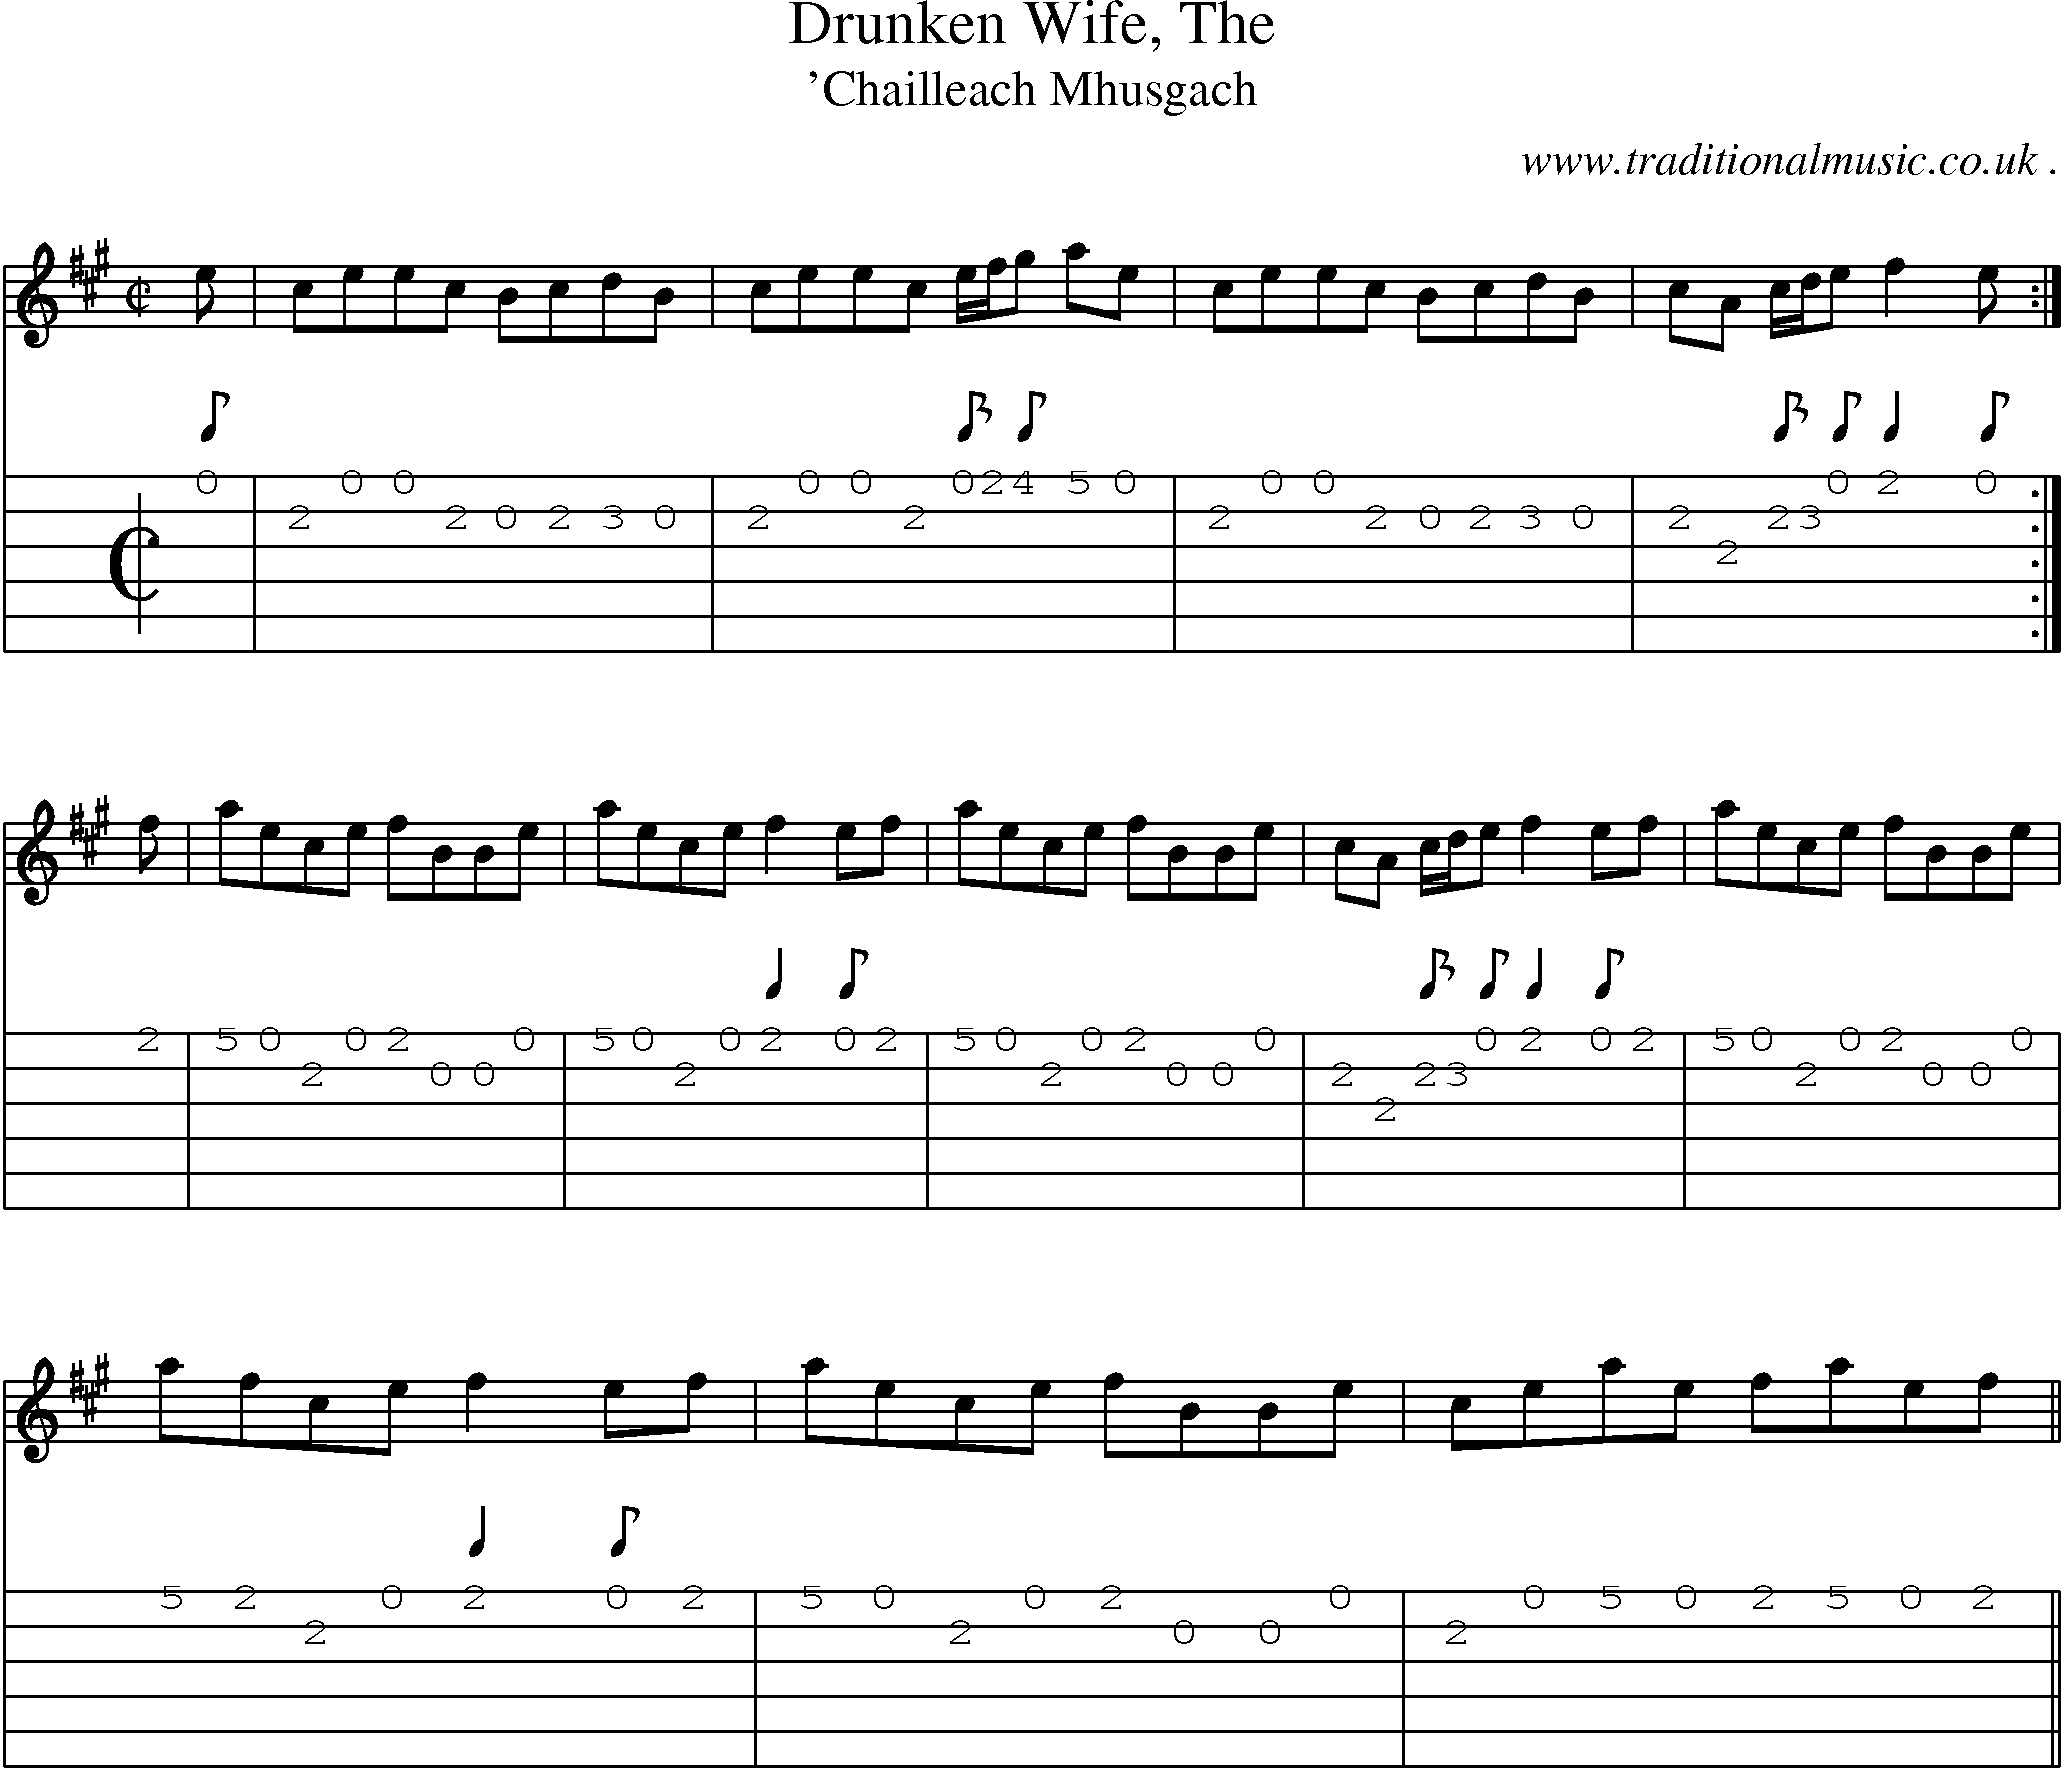 Sheet-music  score, Chords and Guitar Tabs for Drunken Wife The